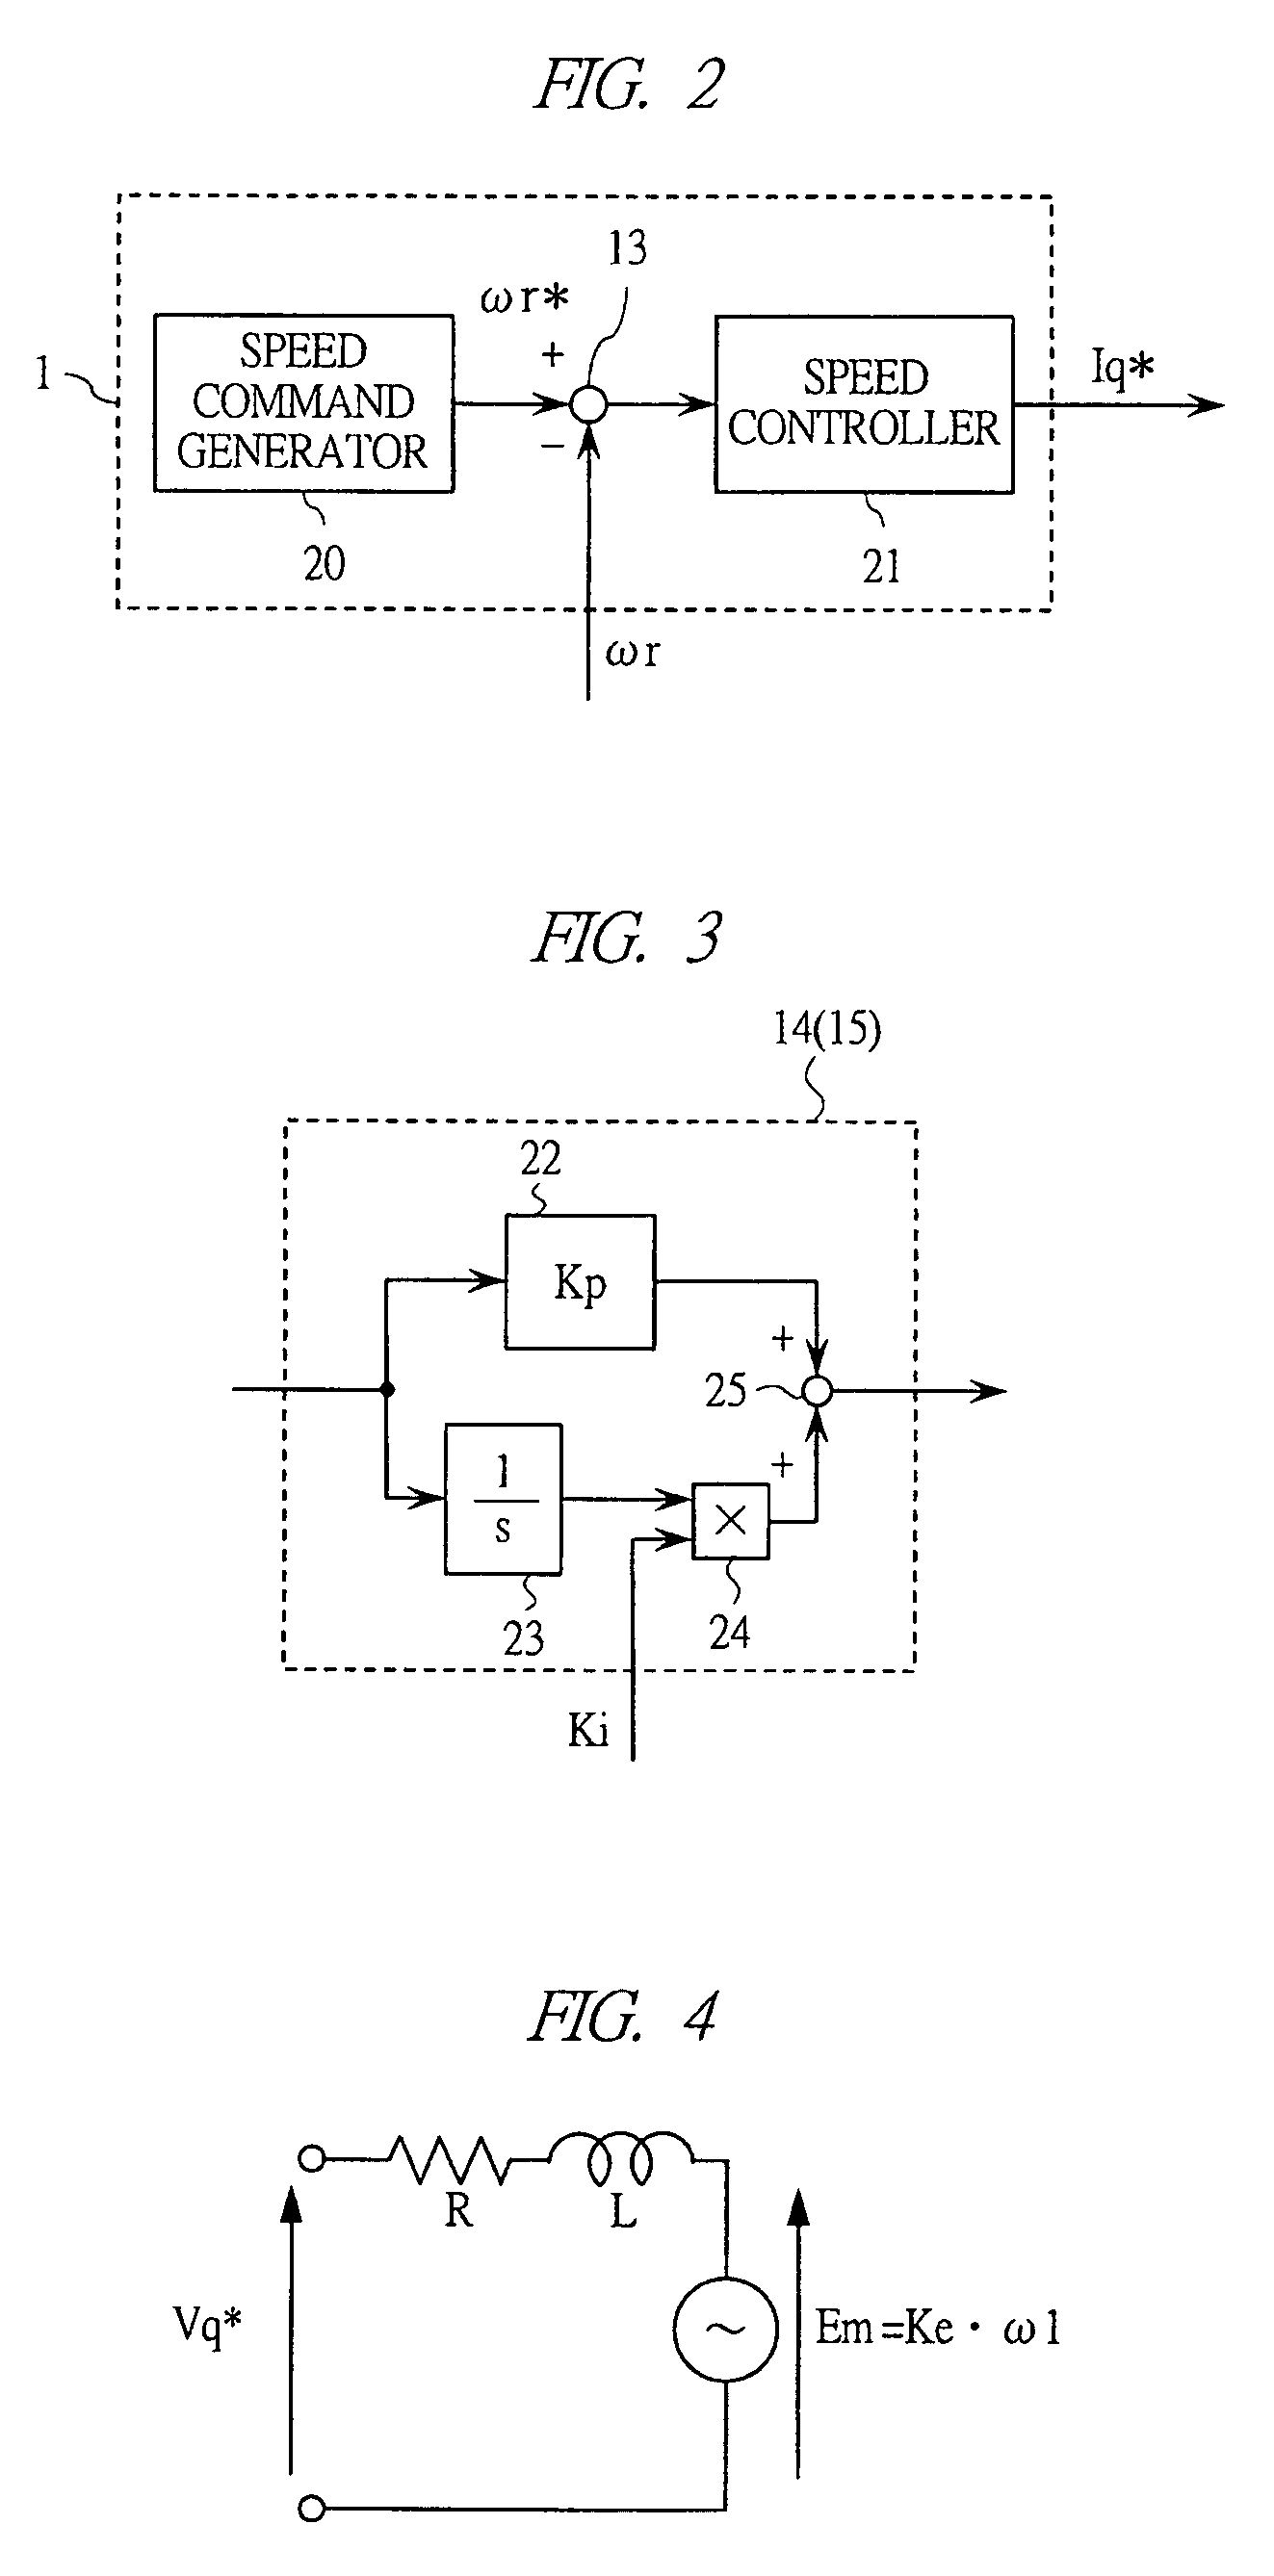 Control device for synchronous motor